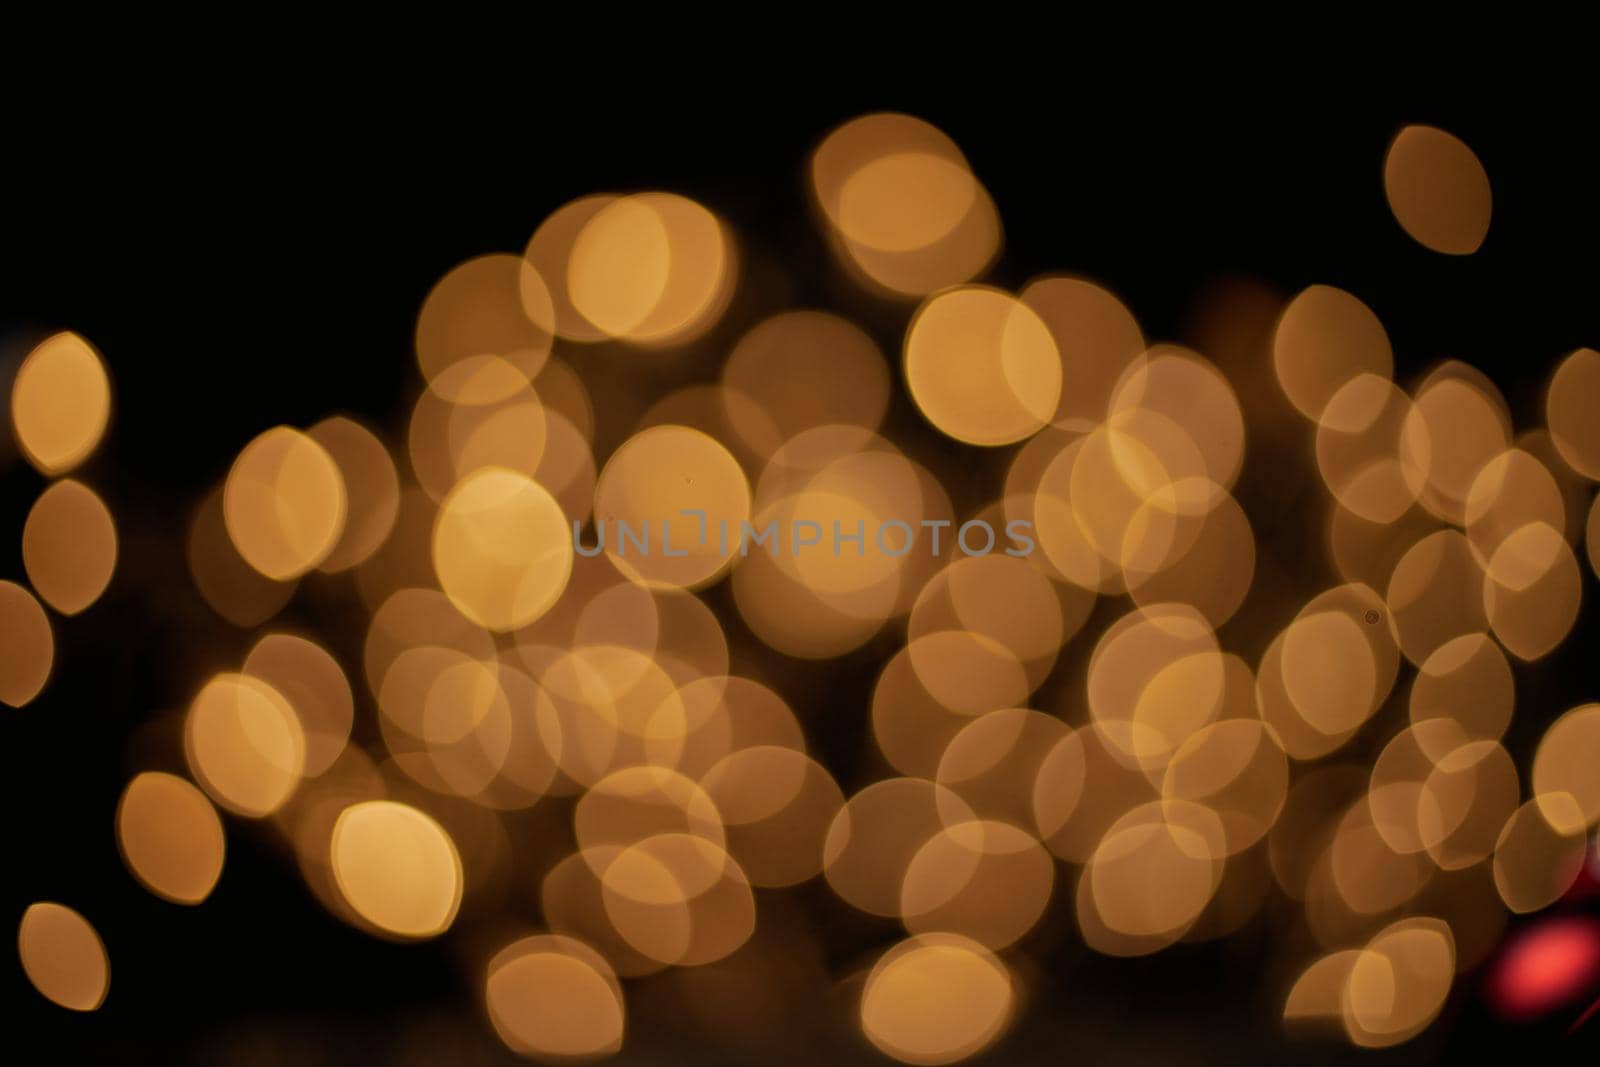 festive golden lights on a black background . photo with a copy-space.